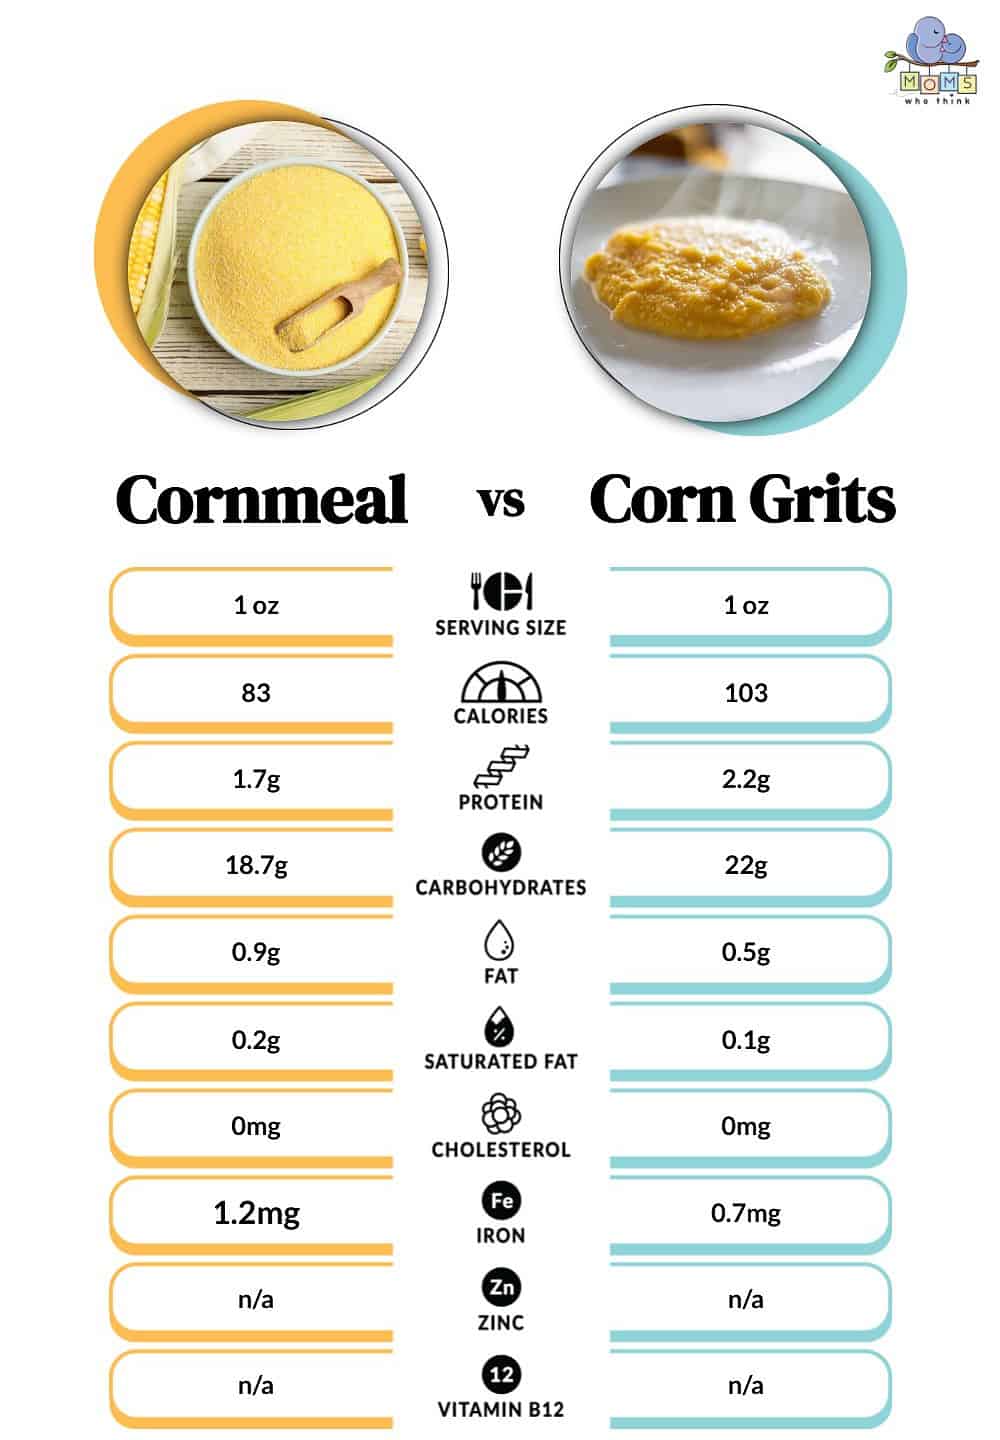 Cornmeal vs Corn Grits Nutritional Facts